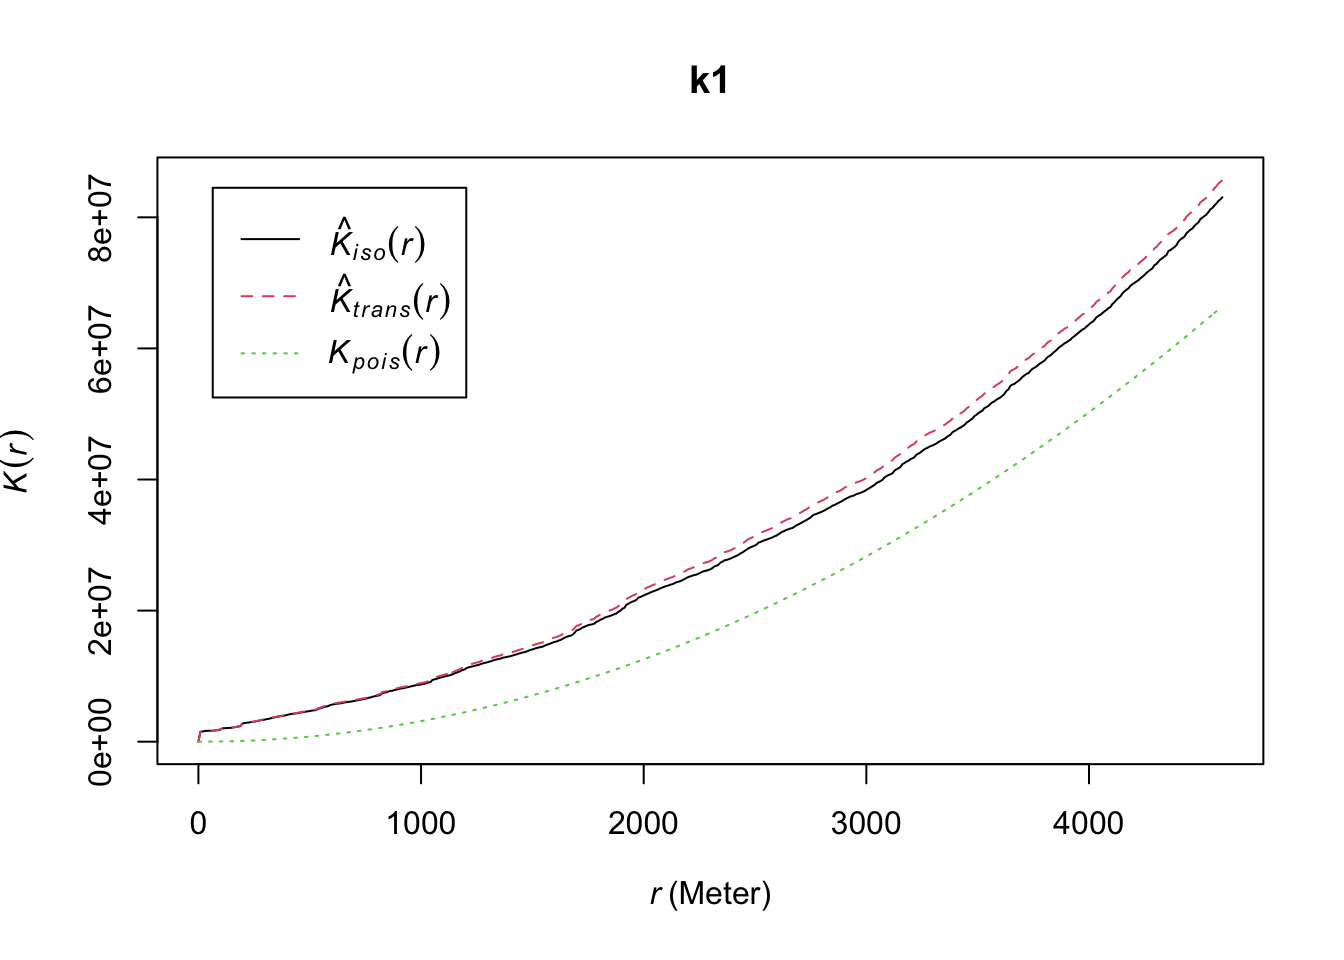 A plot of three curves, titled 'k1', with vertical axis 'K of r', from zero to large values, and horizontal axis 'r in Meters', from zero to five thousand. A legend near the top left identifies the three curves, all of which steadily increase from near the origin, with an increasing rate of growth. The top curve, namely 'K hat trans of r', rises the fastest, and is nearly matched by 'K hat iso of r', a tiny difference at two thousand meters growing to a small difference at five thousand. The third curve, 'K pois of r', is much smoother than, and is significantly beneath the other two curves.